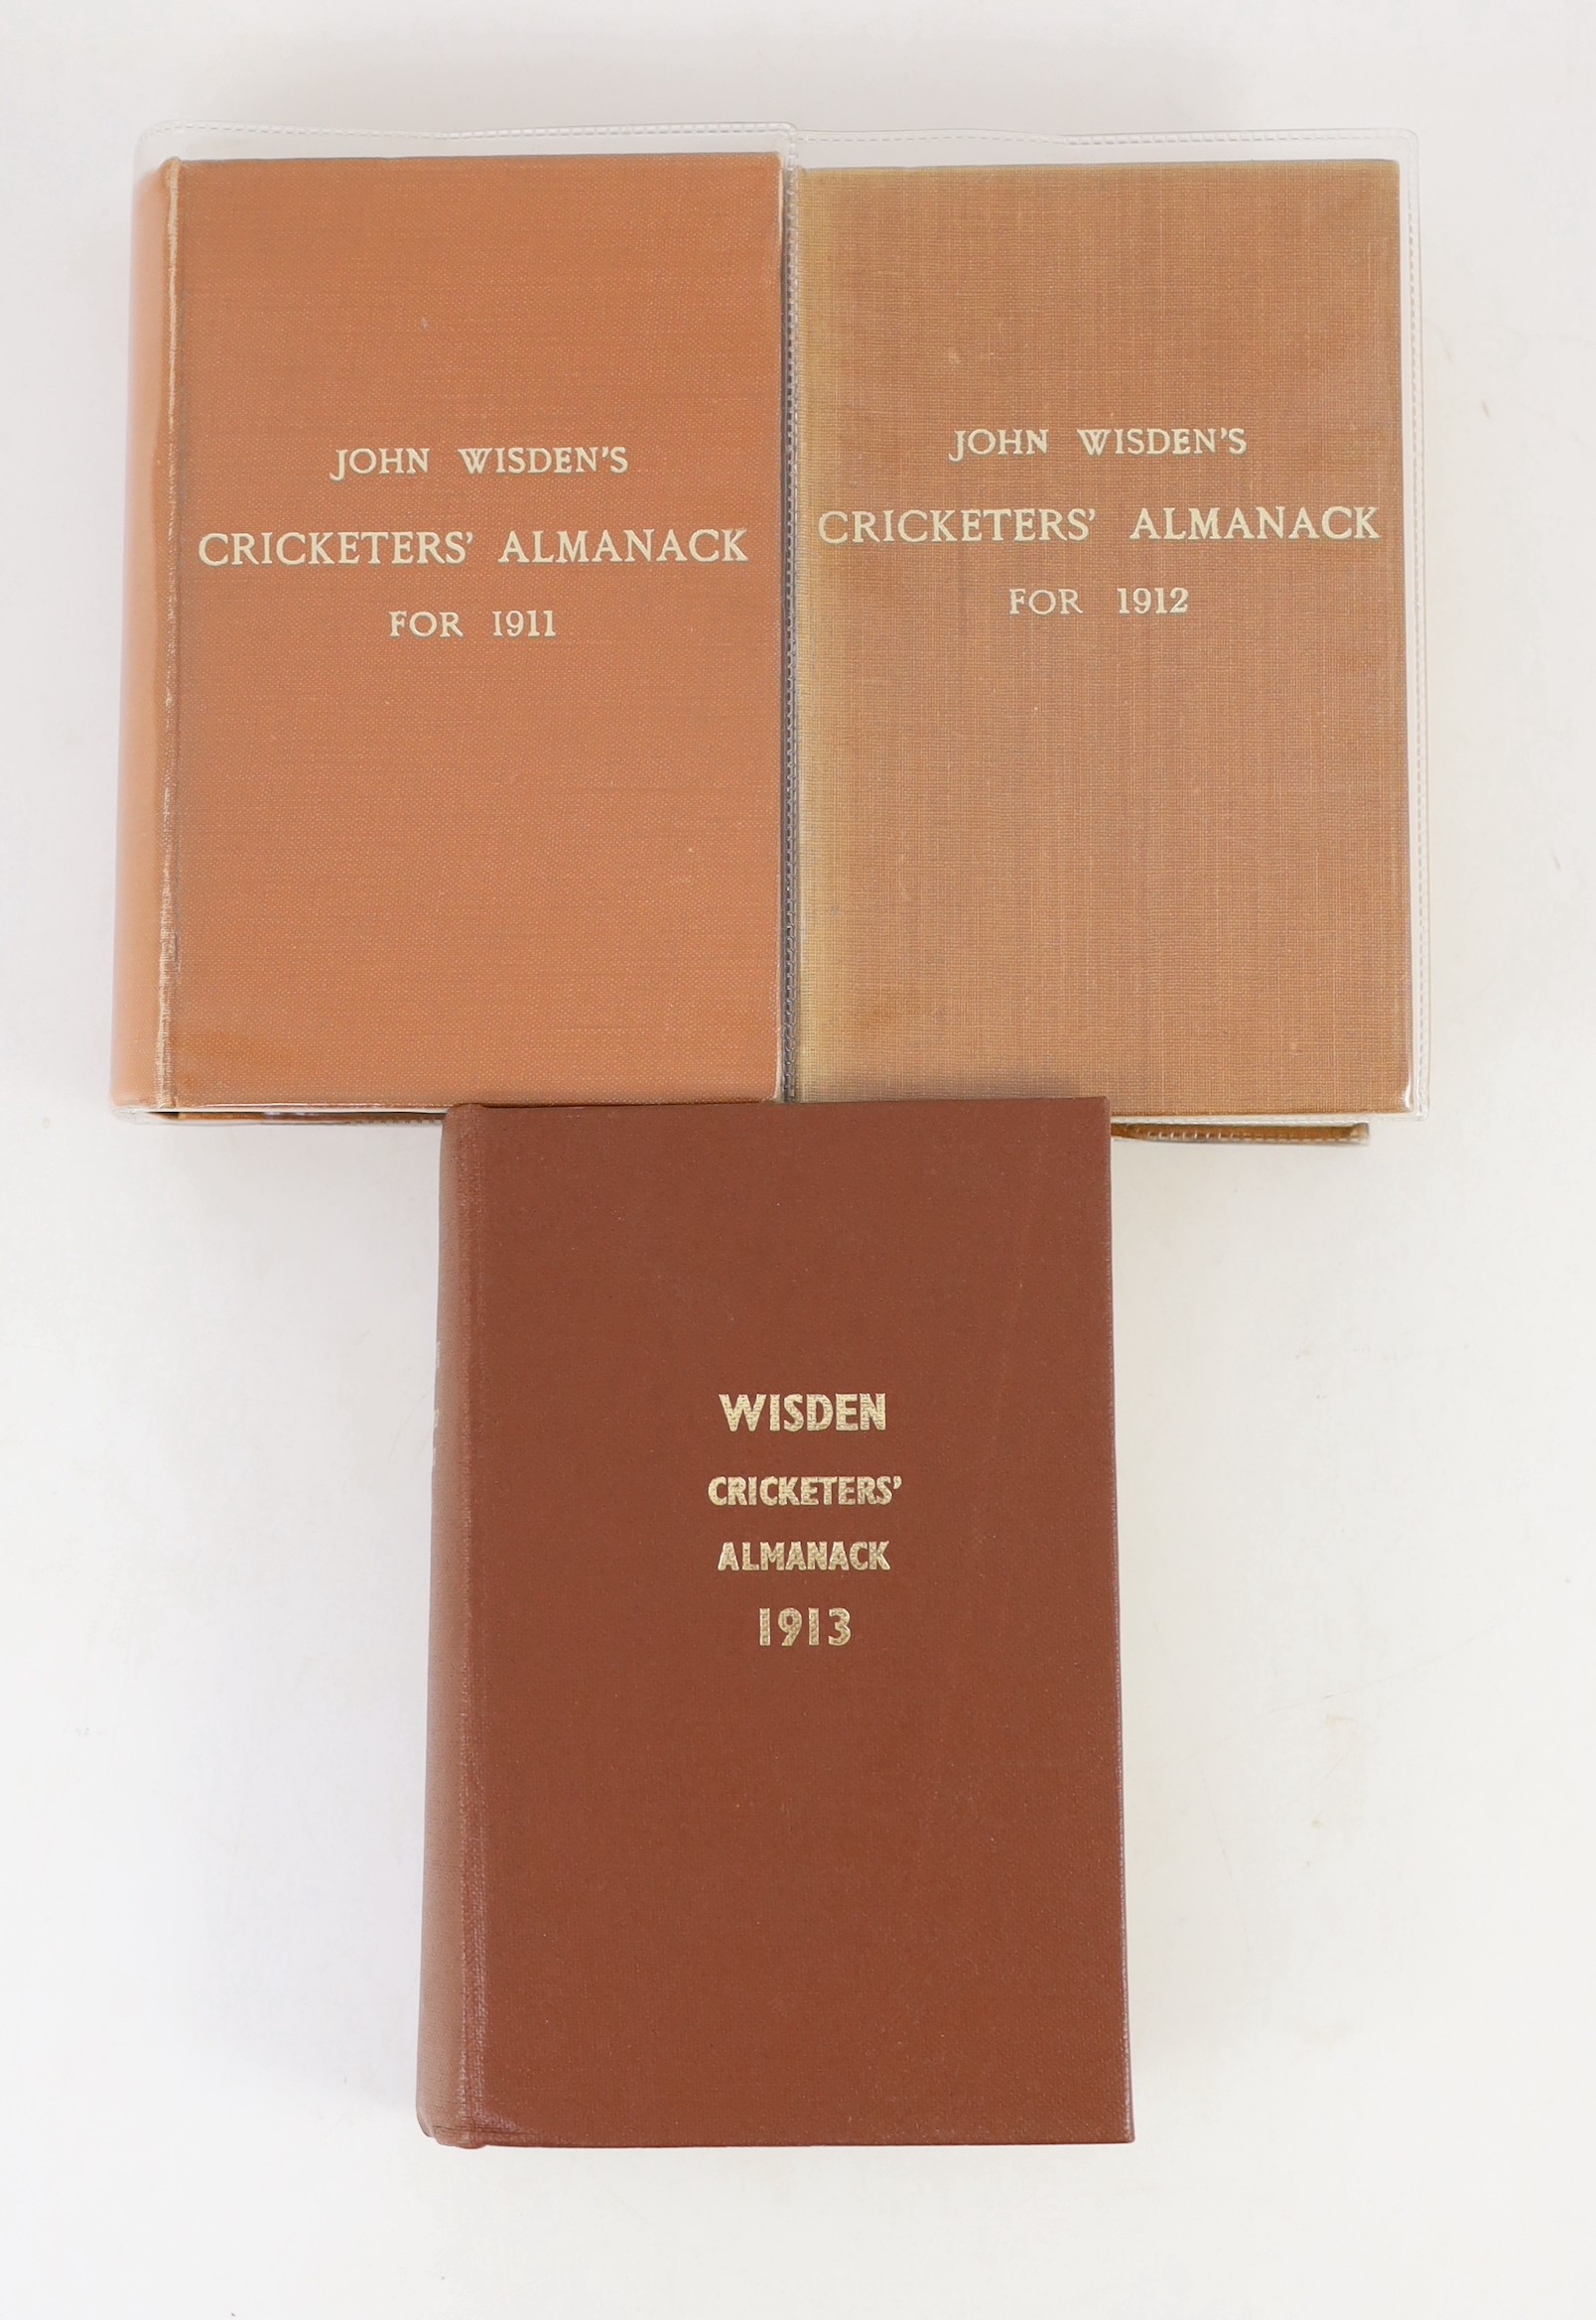 Wisden, John - Cricketers’ Almanack for the years 1907 (44th edition) - 1913 (Jubilee number), all rebound brown cloth gilt, and retaining original paper wrappers, bar issue of 1912, lower paper margin to front wrapper o